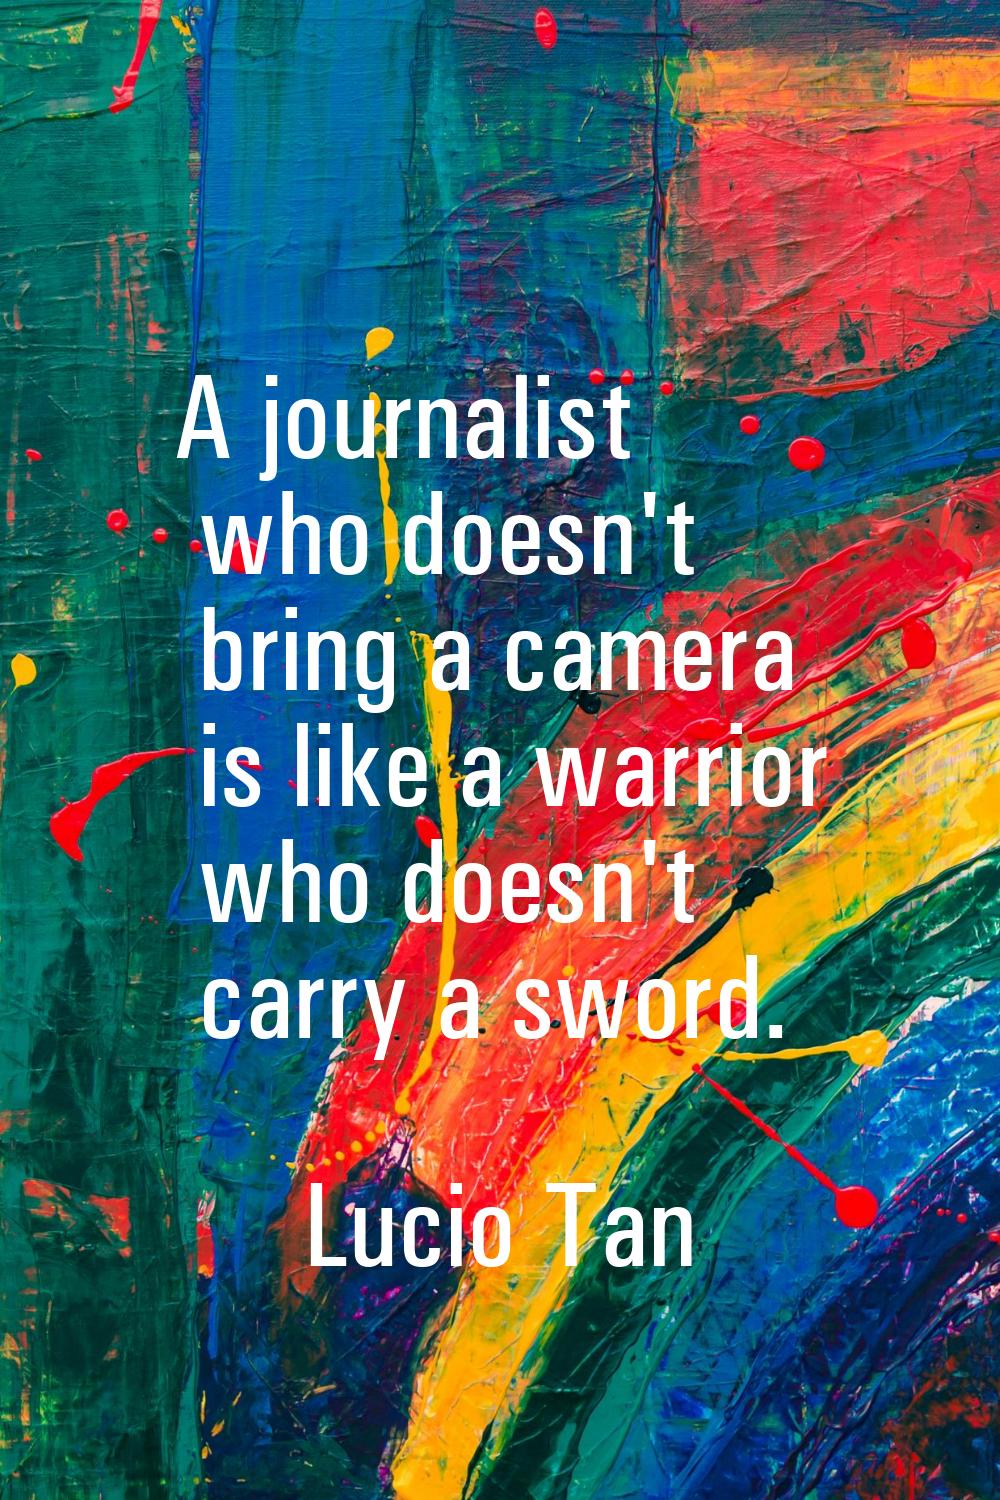 A journalist who doesn't bring a camera is like a warrior who doesn't carry a sword.